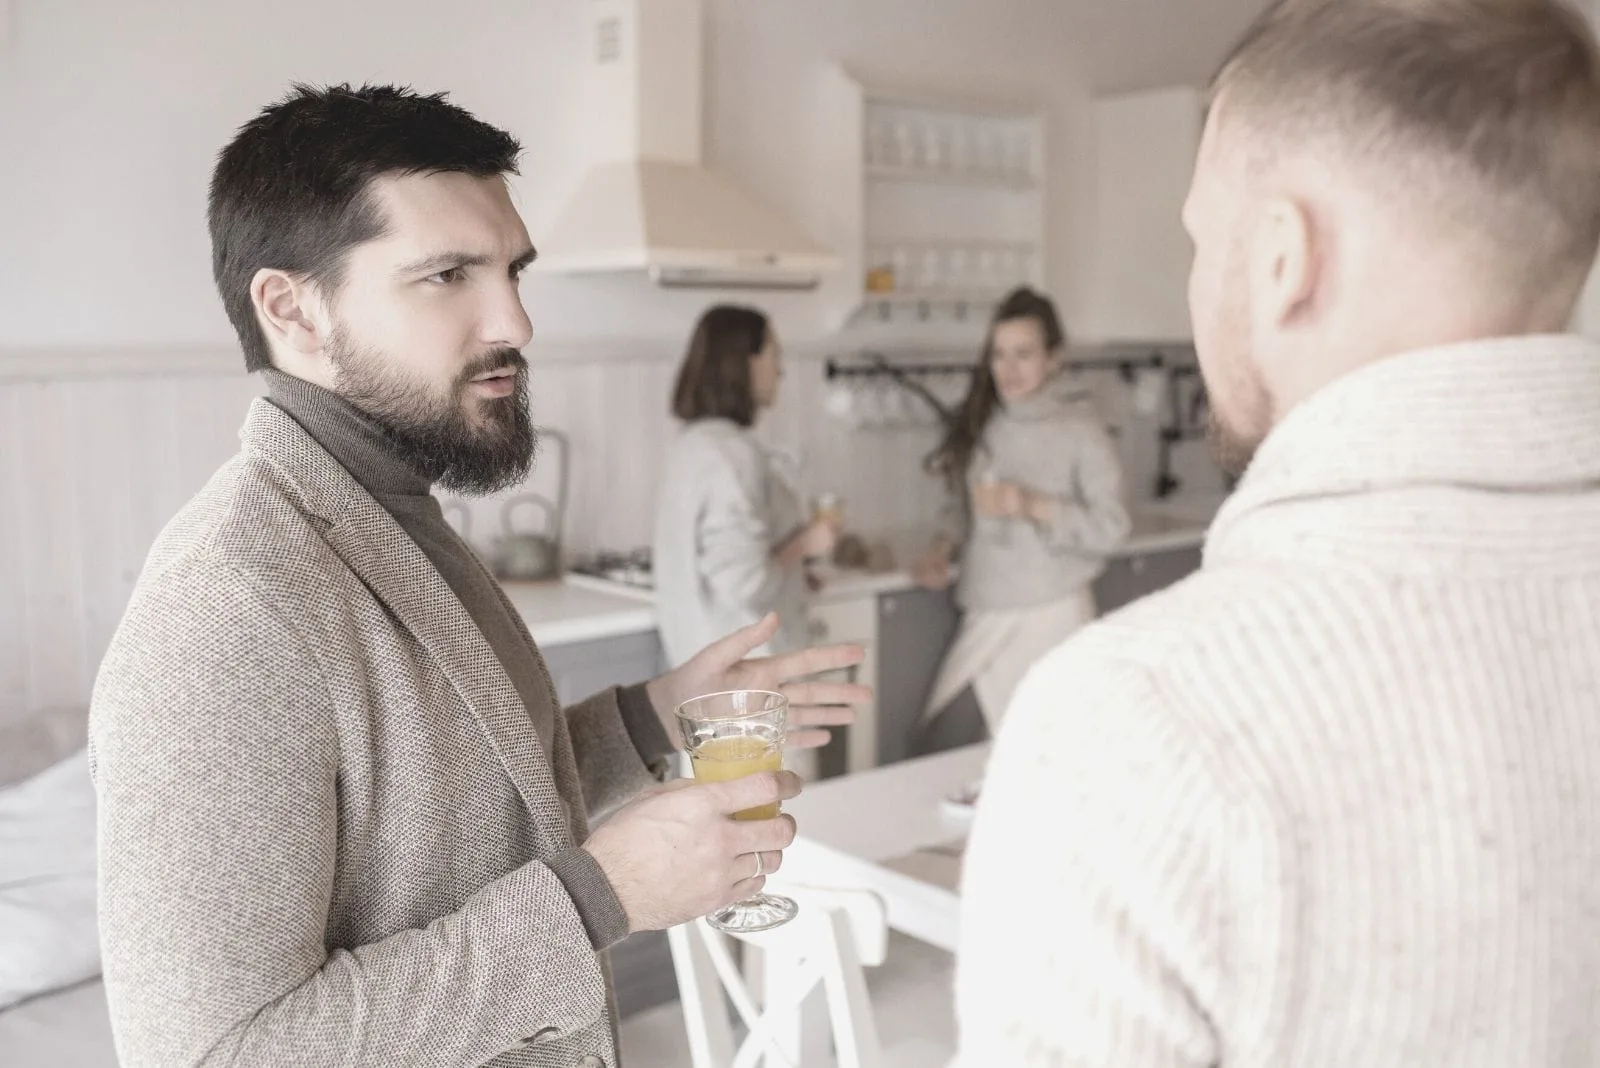 two men talking seriously inside the kitchen with two women talking at the background